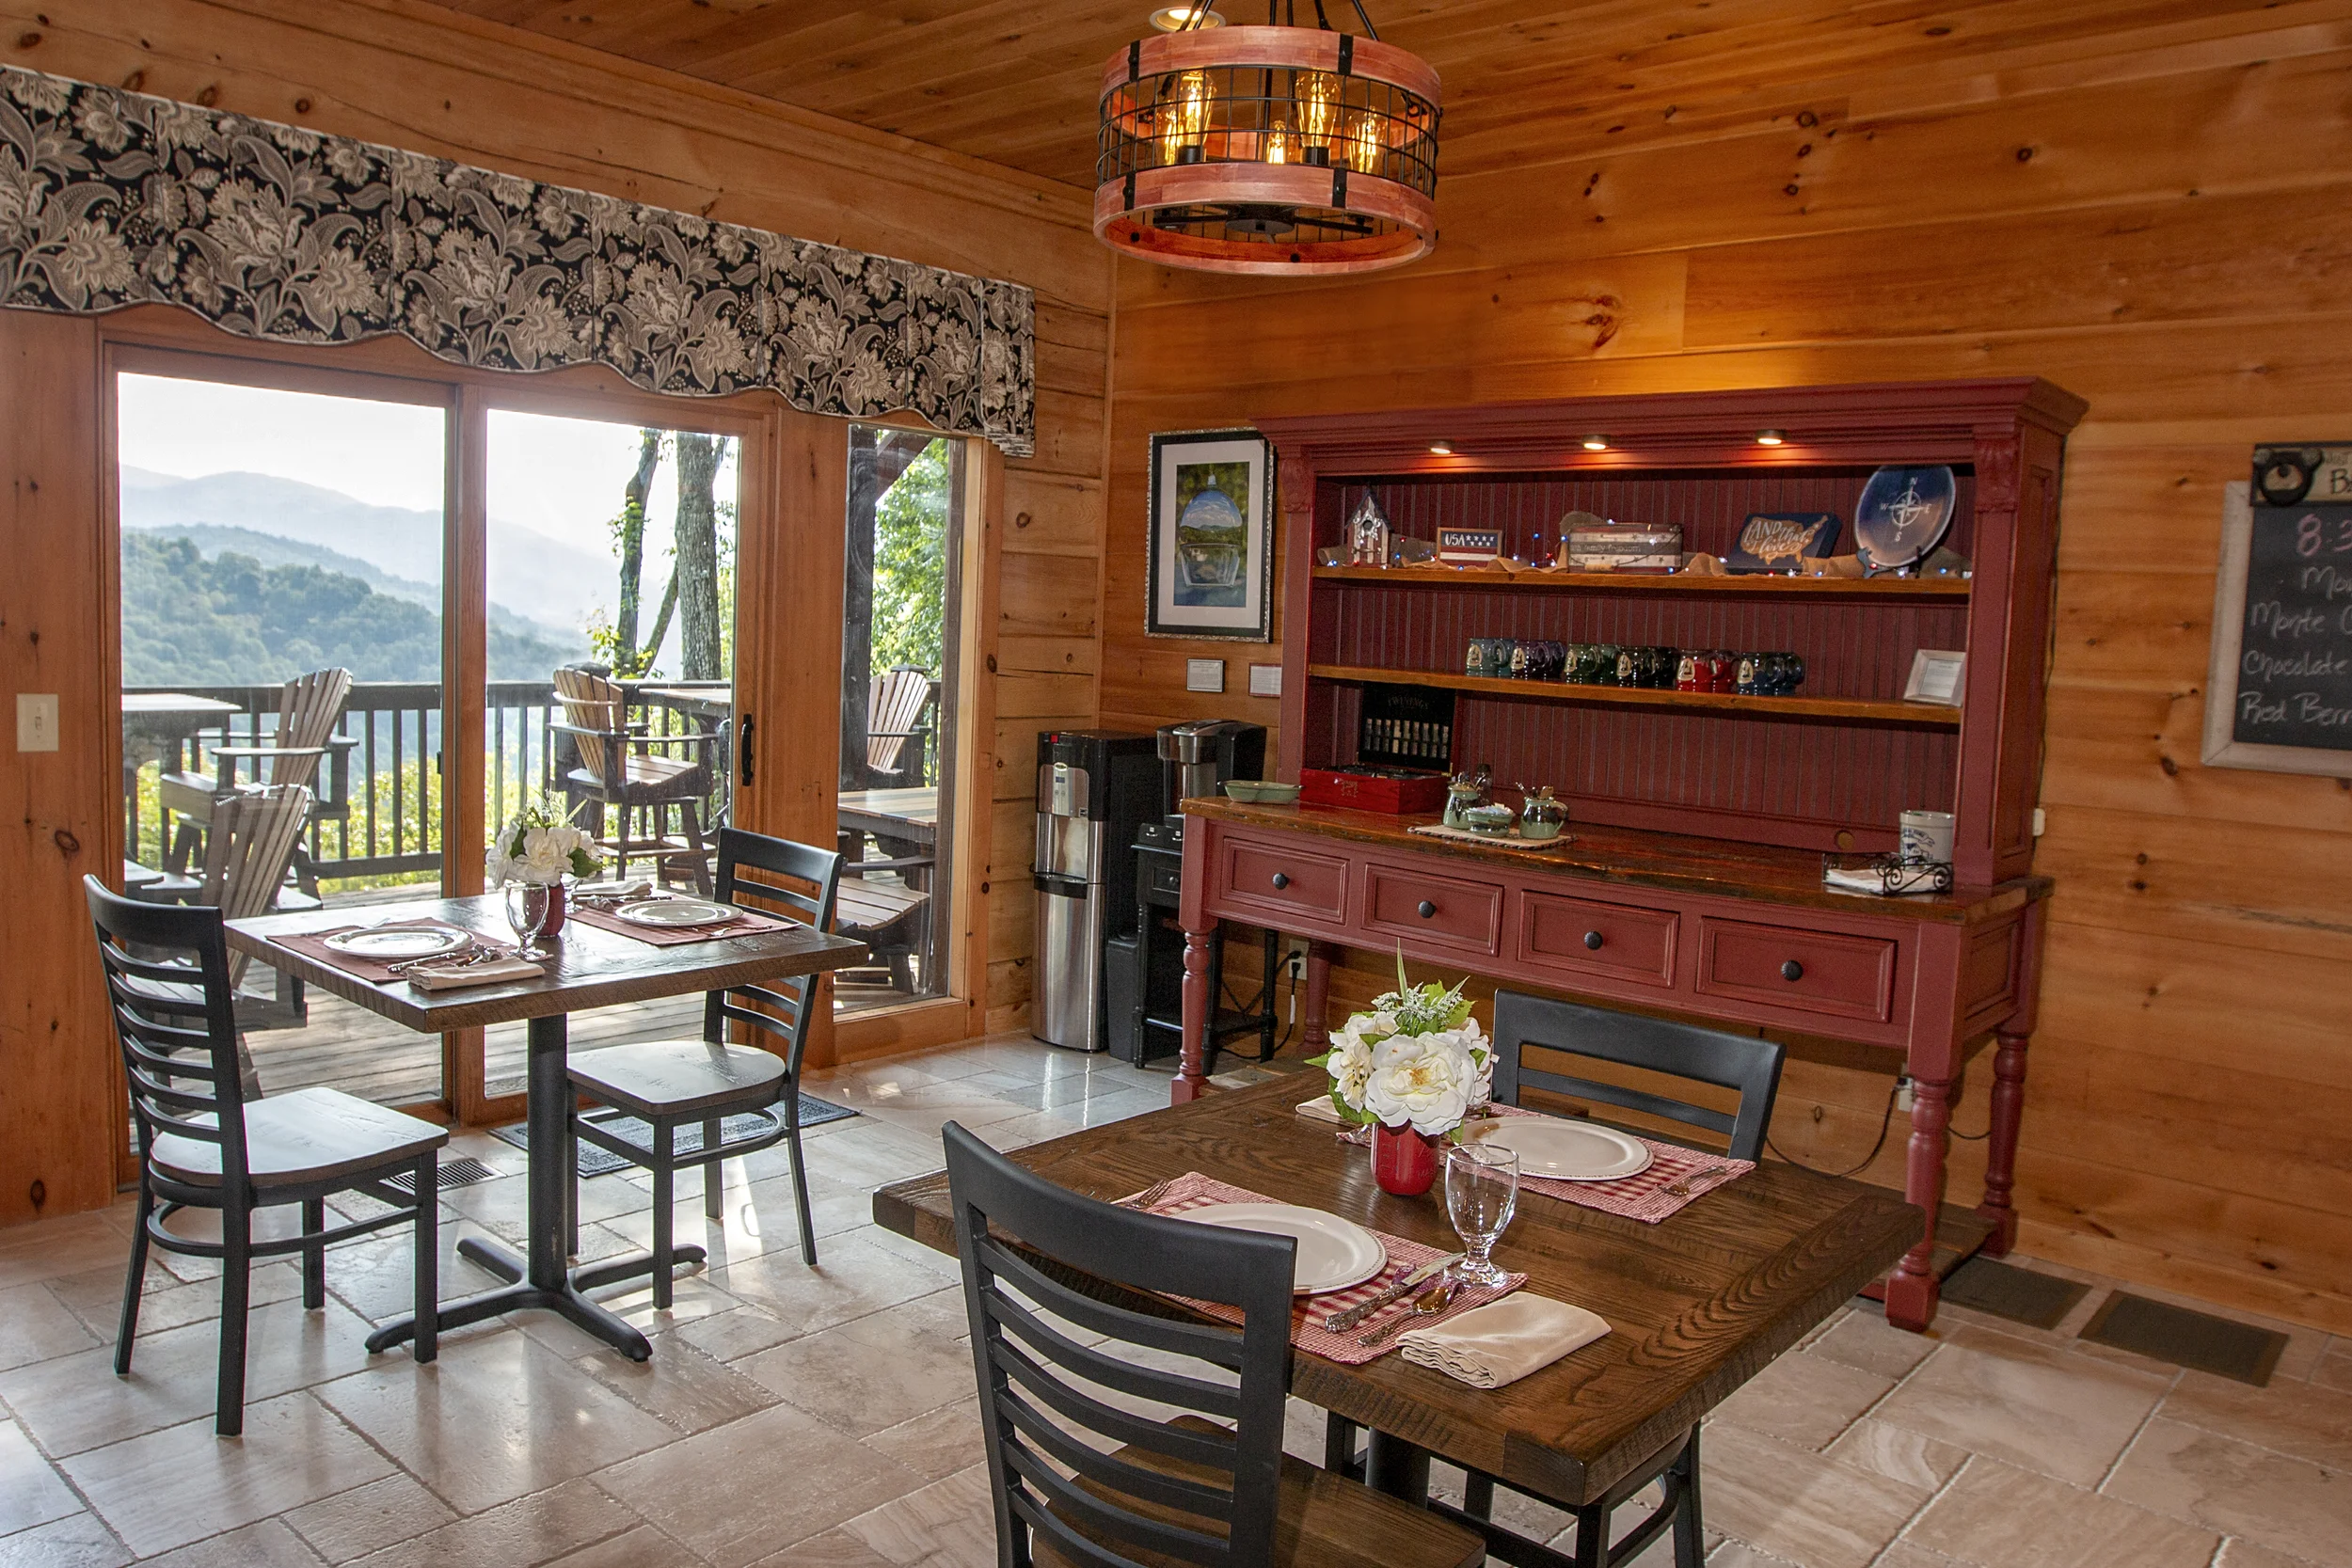 Dining room features five individual tables for couples, fireplace, buffet counter, guest refrigerator, microwave, beverage center and spectacular views of the front gardens and mountain views out the